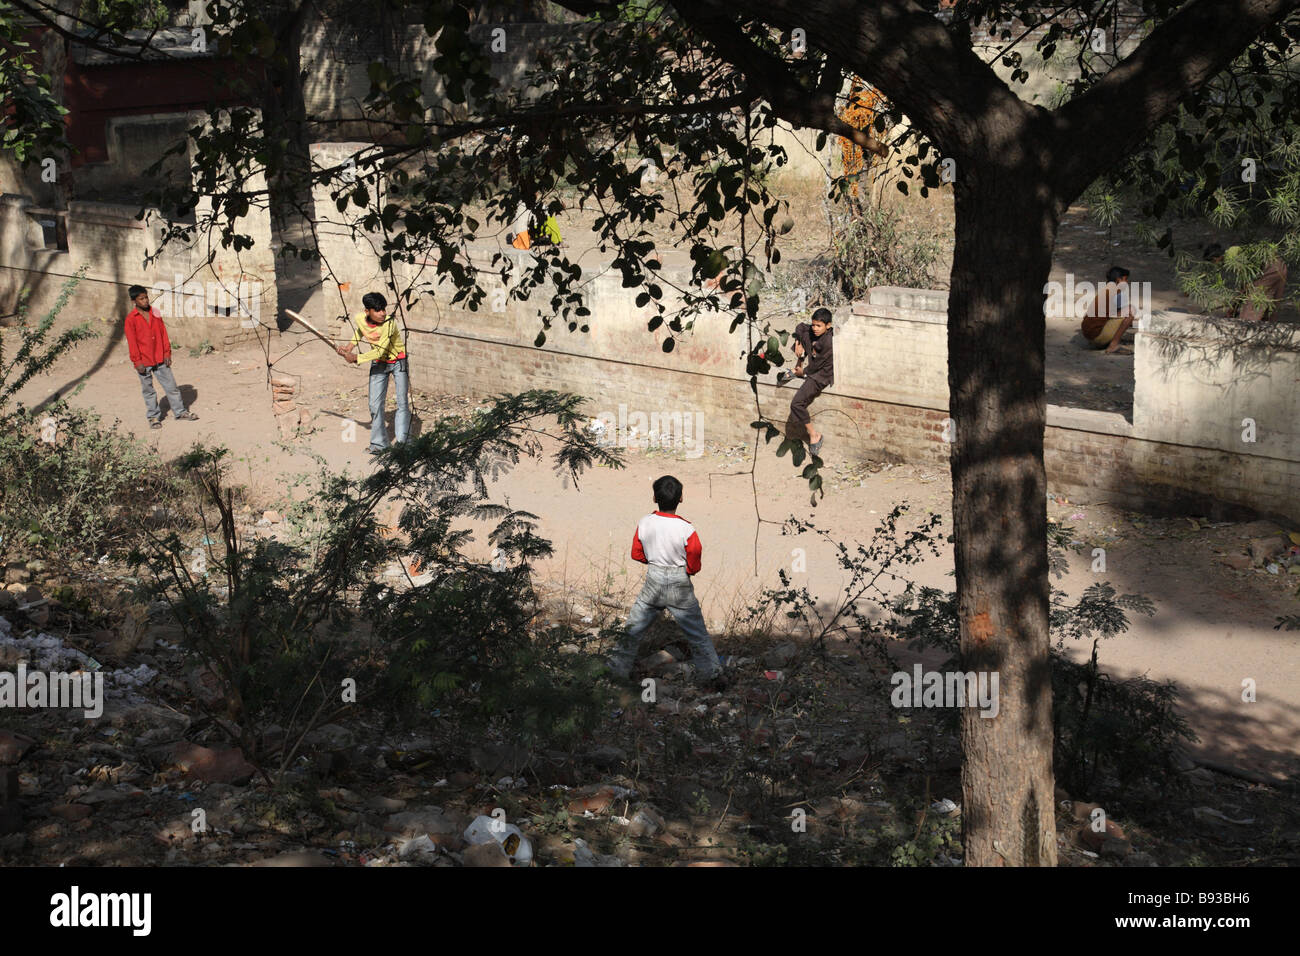 Young boys play a game of cricket by the side of the road near New Delhi Train Station, Delhi, India. Stock Photo